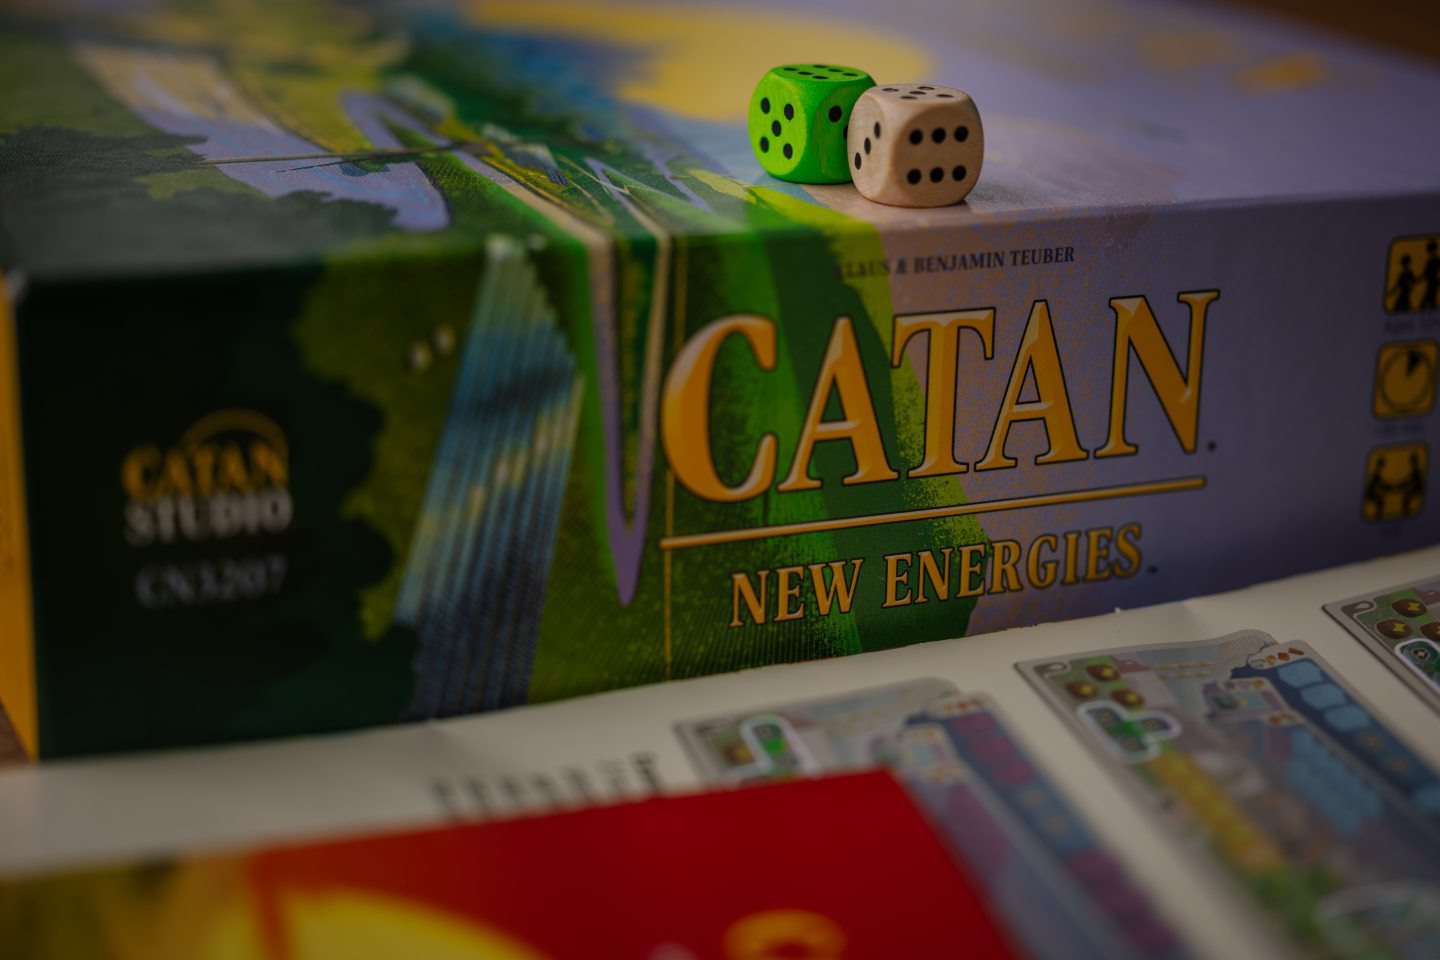 Catan: New Energies pits fossil fuels against renewable energy